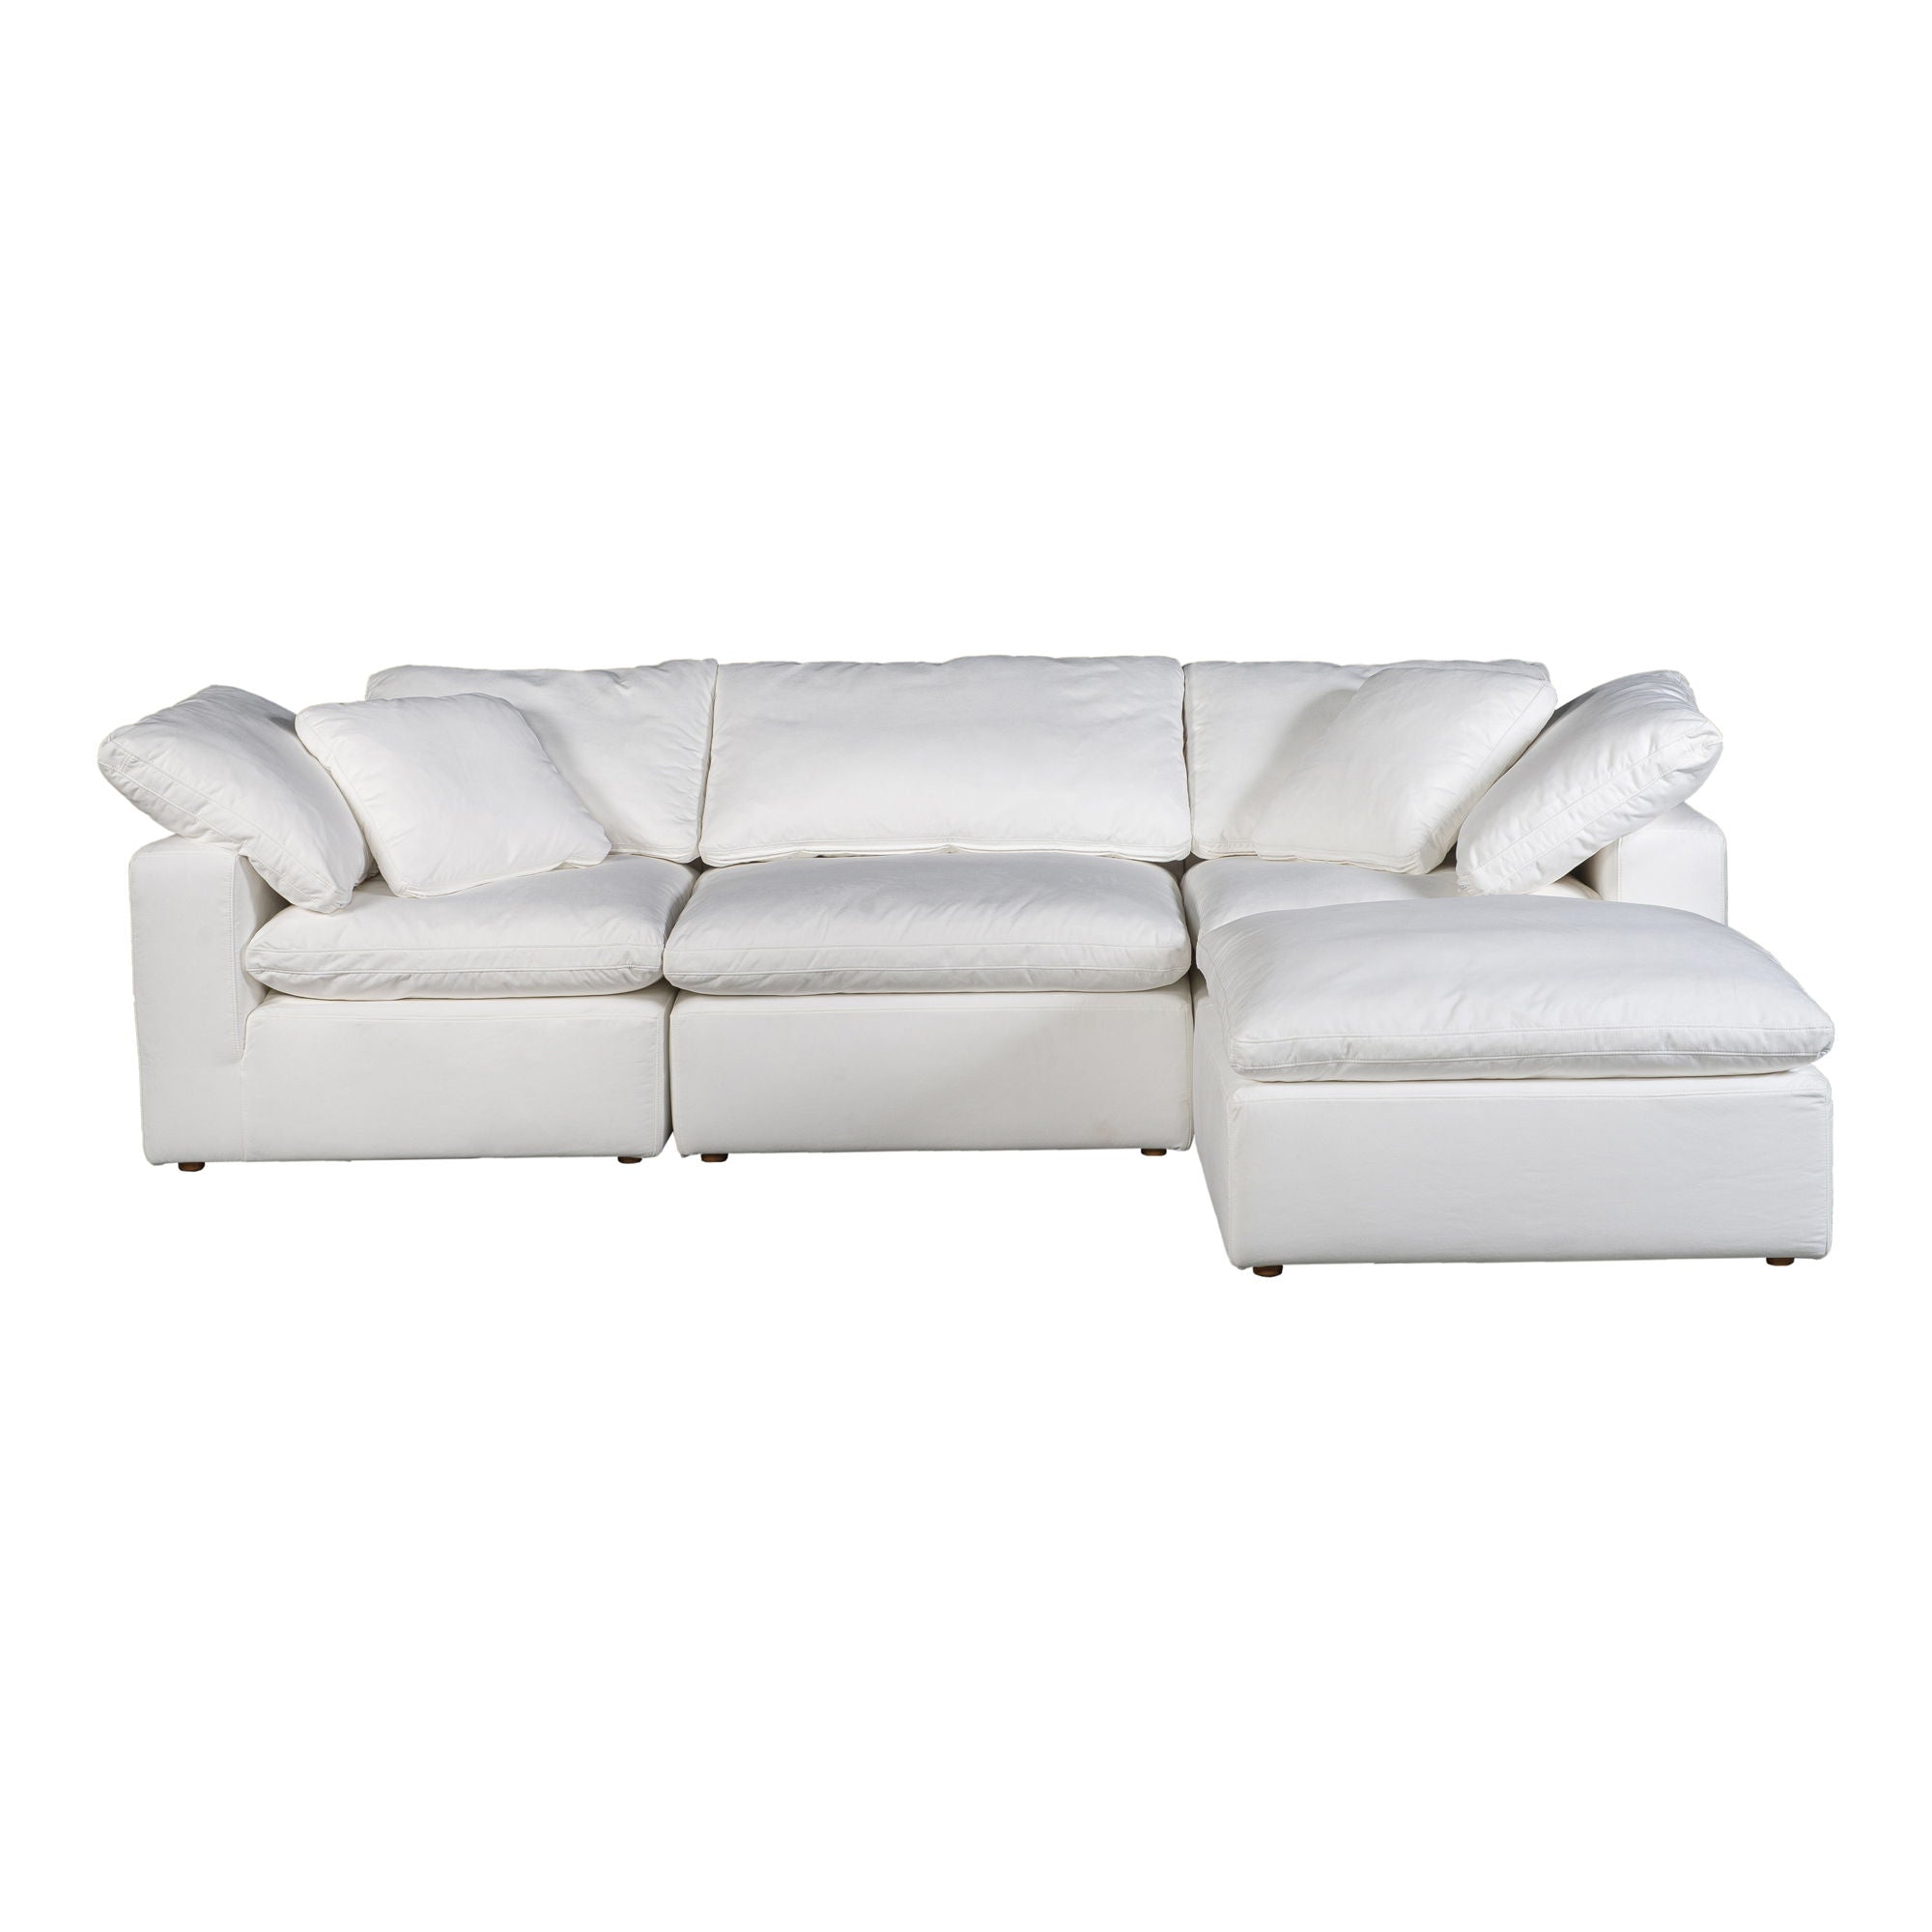 Terra Condo Lounge Modular Sectional - LiveSmart Fabric - Cream White - Comfortable and Stylish Living Room Furniture-Stationary Sectionals-American Furniture Outlet